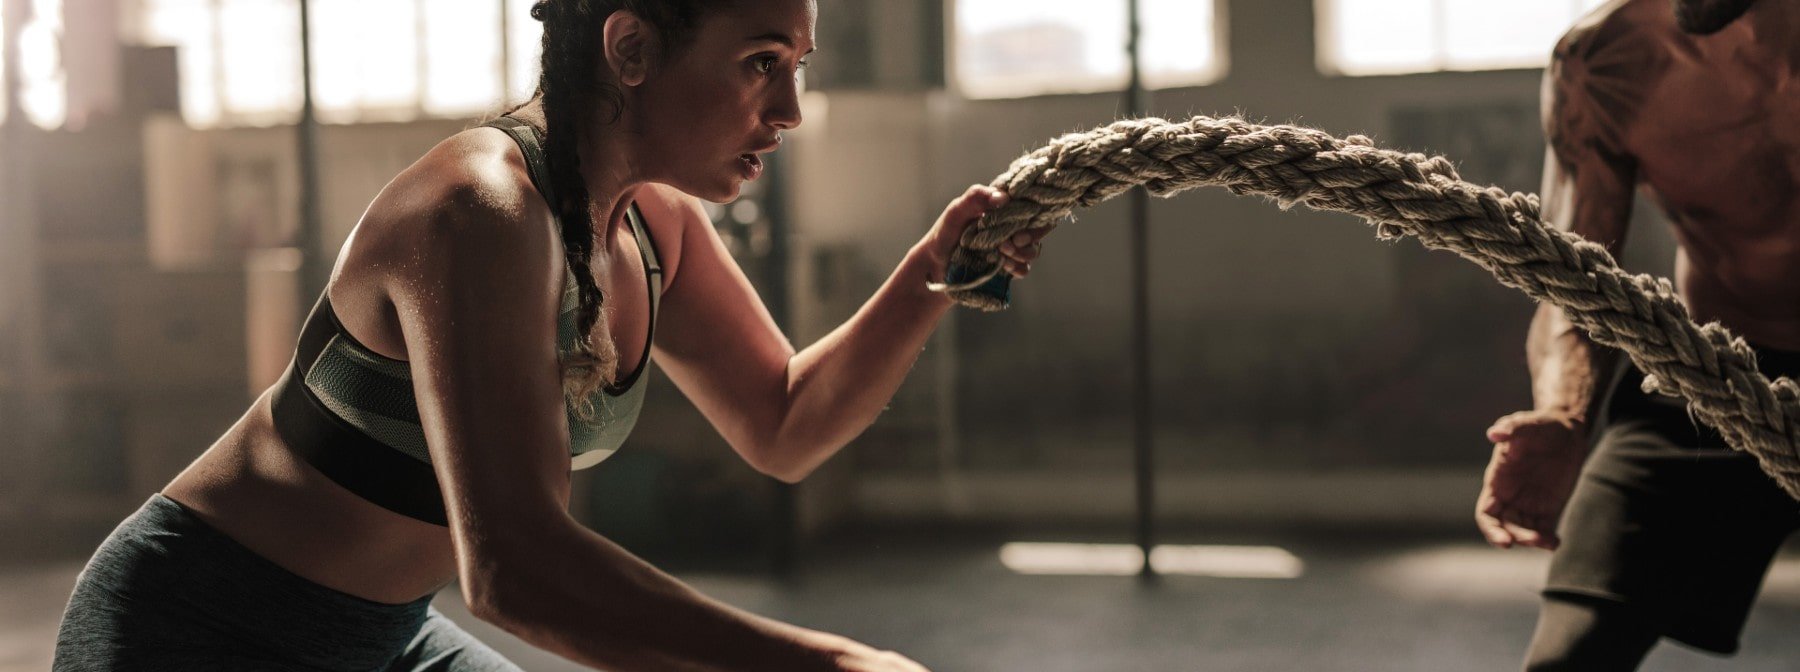 Beat Post-Lockdown Gym Anxiety With These Tips